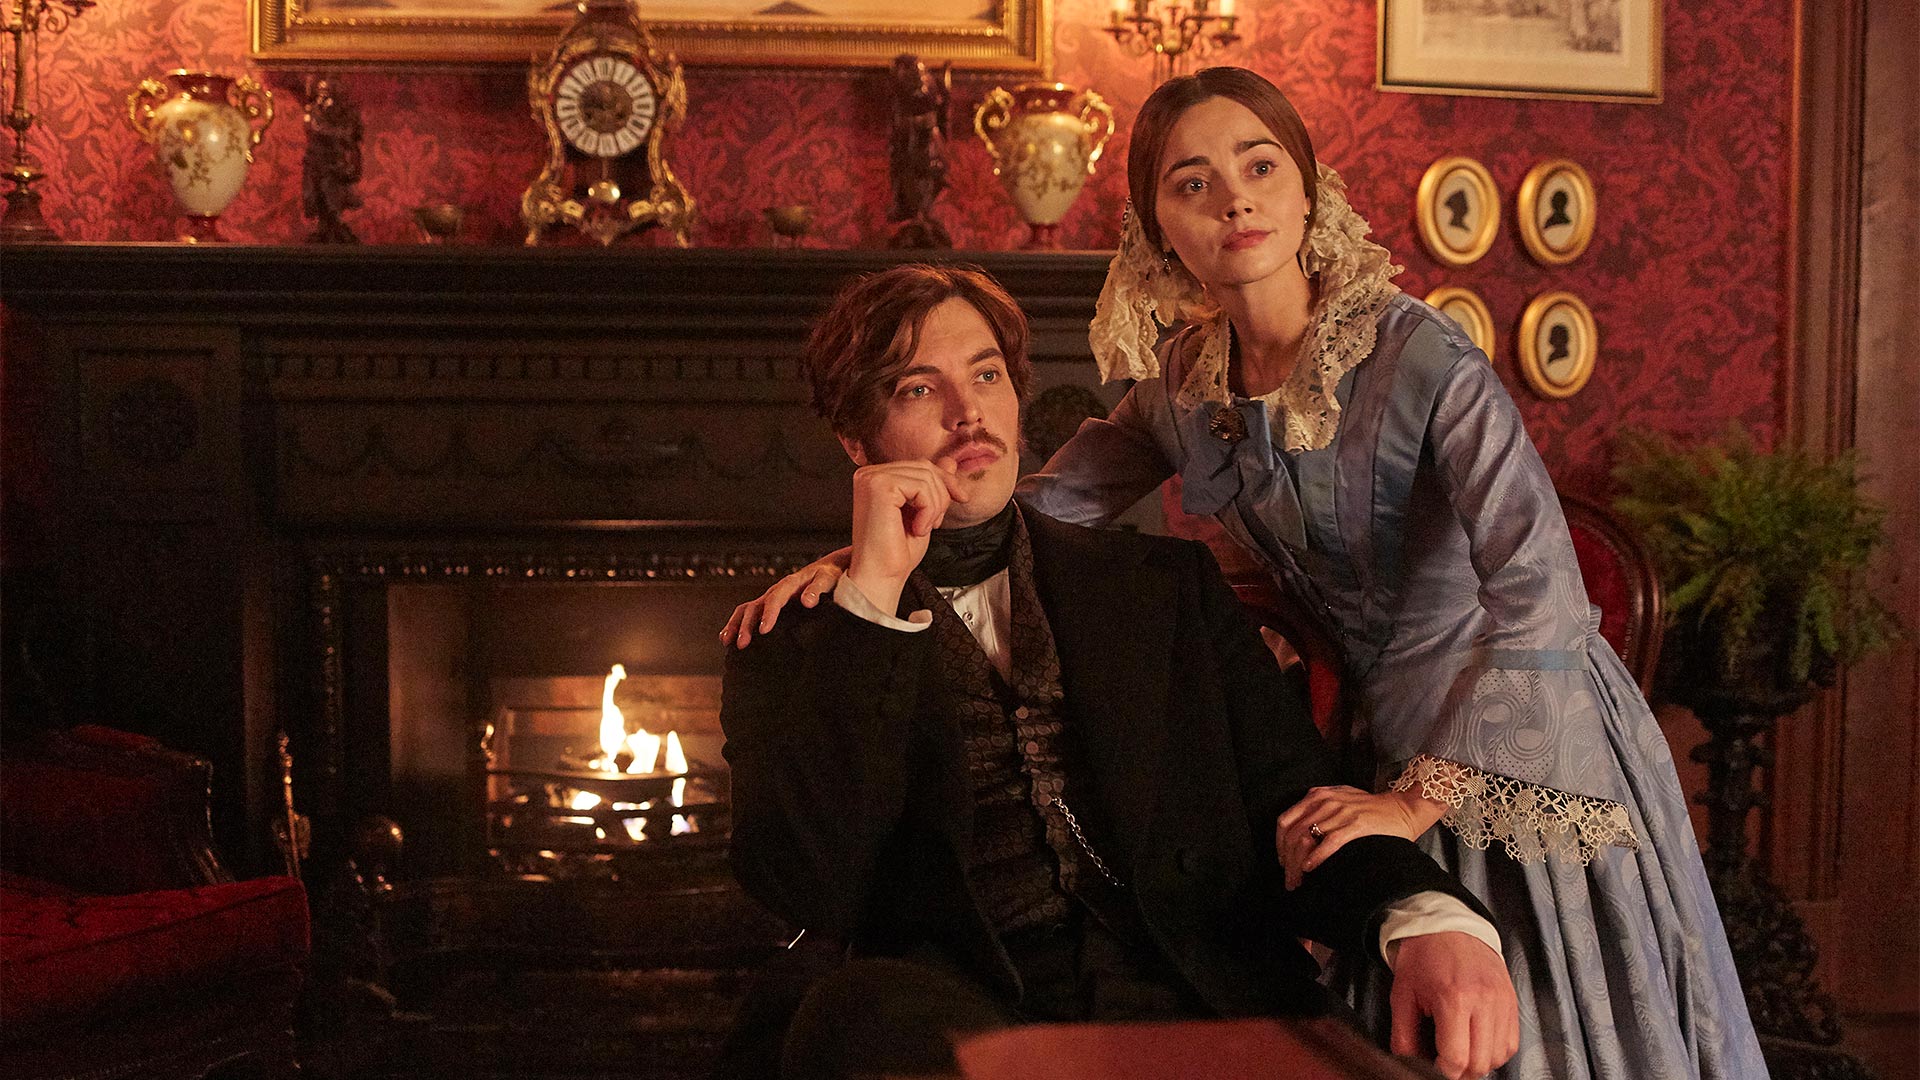 Prince Albert played by Tom Hughes and Queen Victoria played by Jenna Coleman
